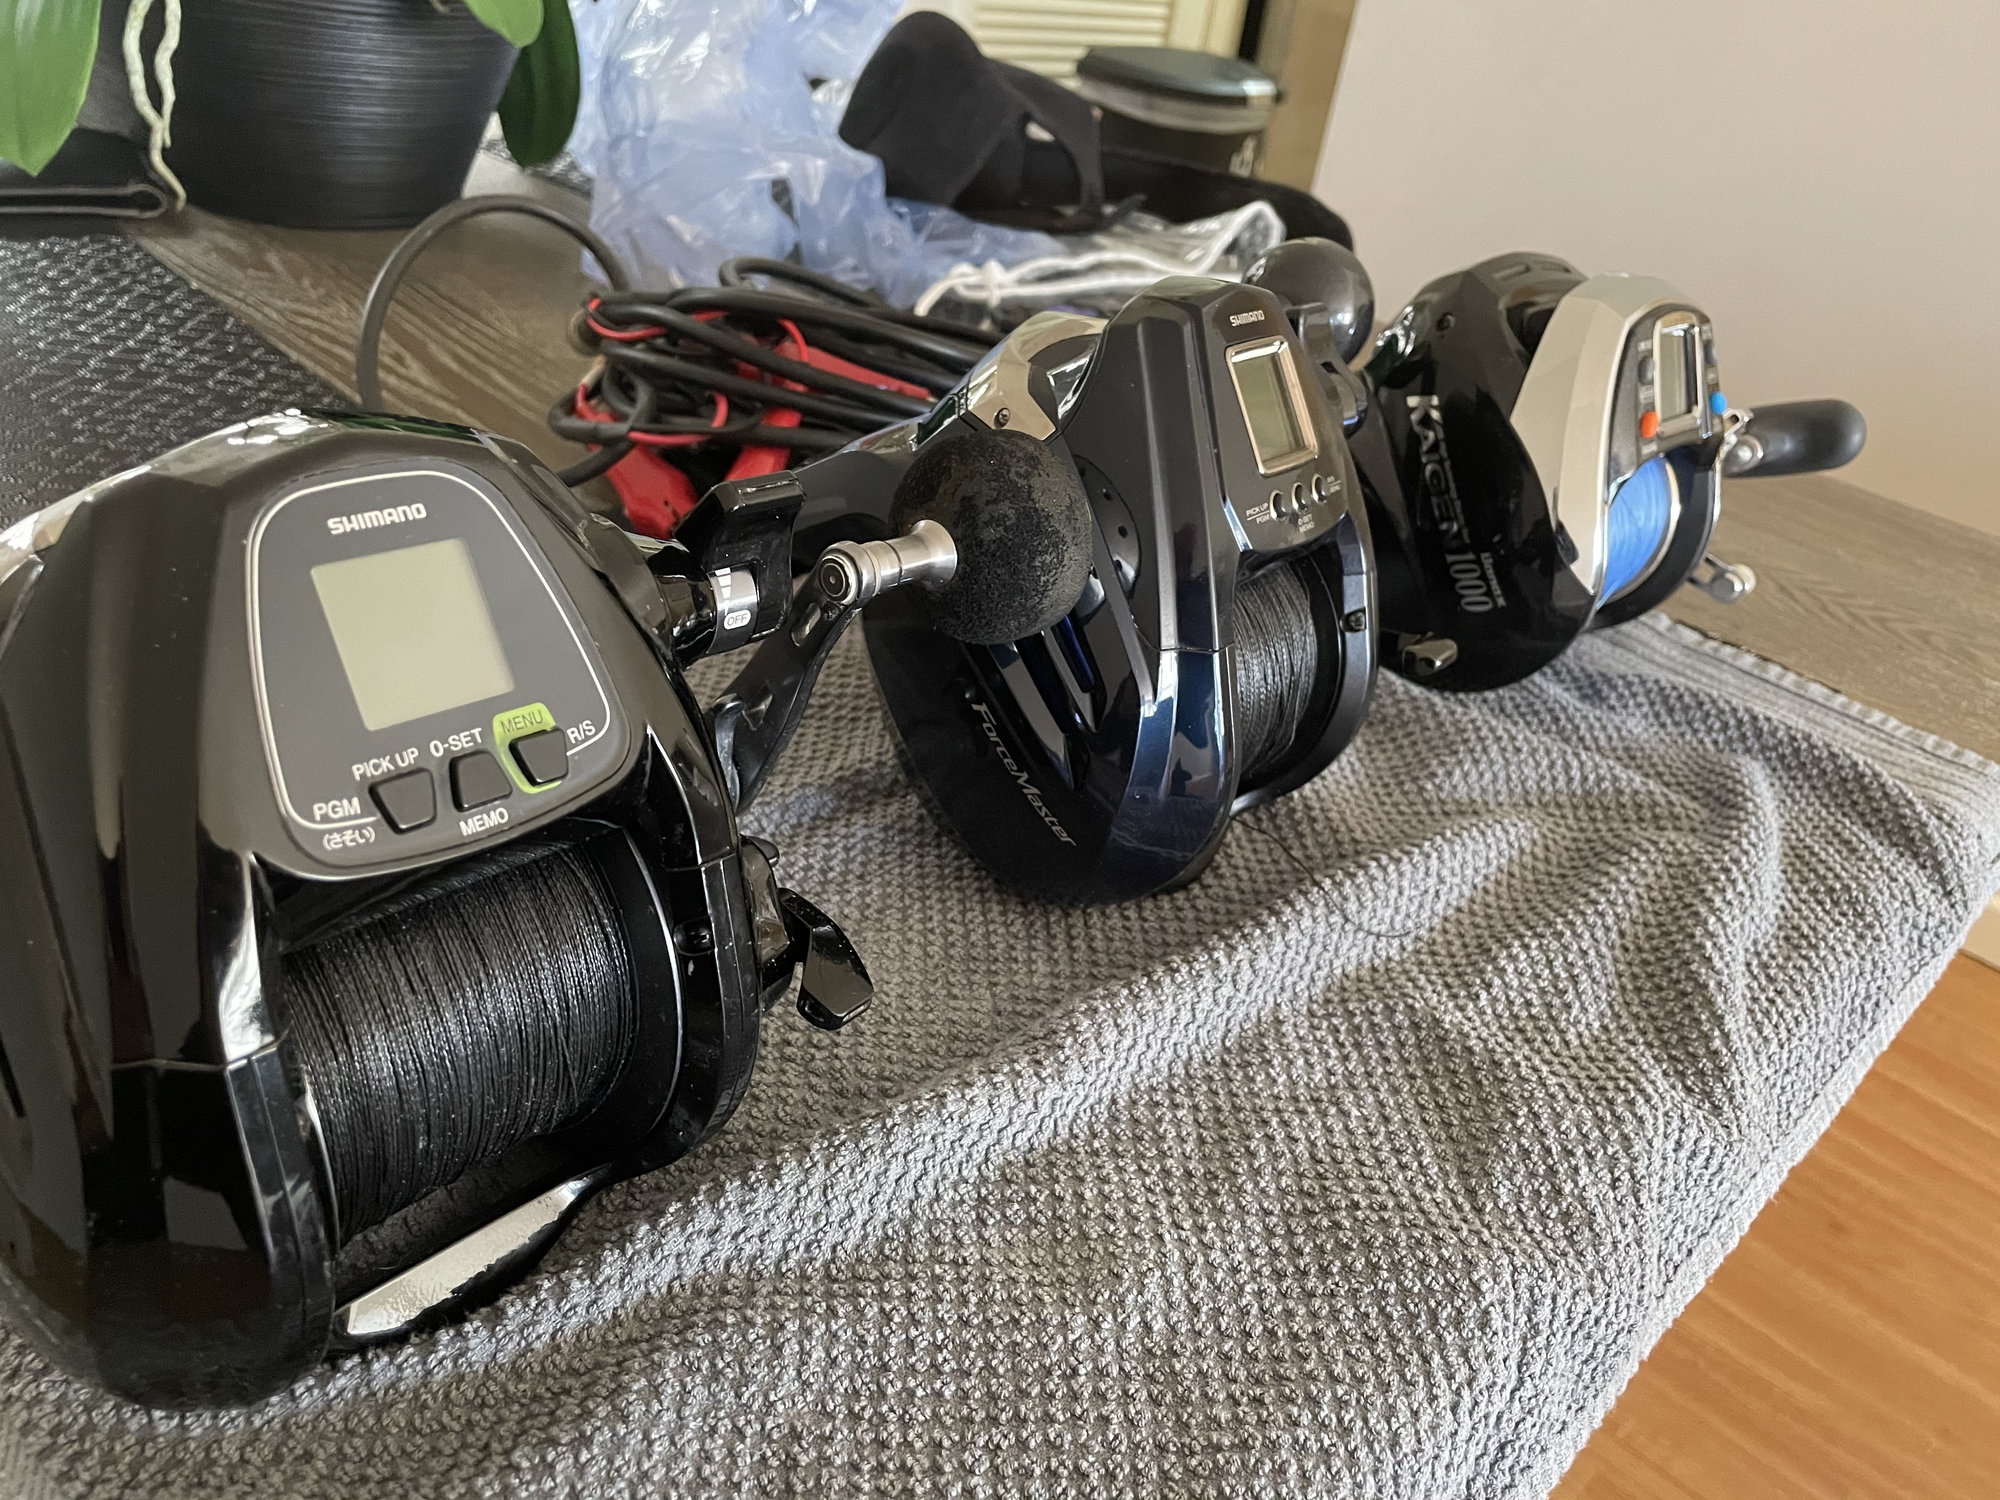 All sold 2 Shimano Forcemaster 9000, 1 Banax Kaigen 1000 electric